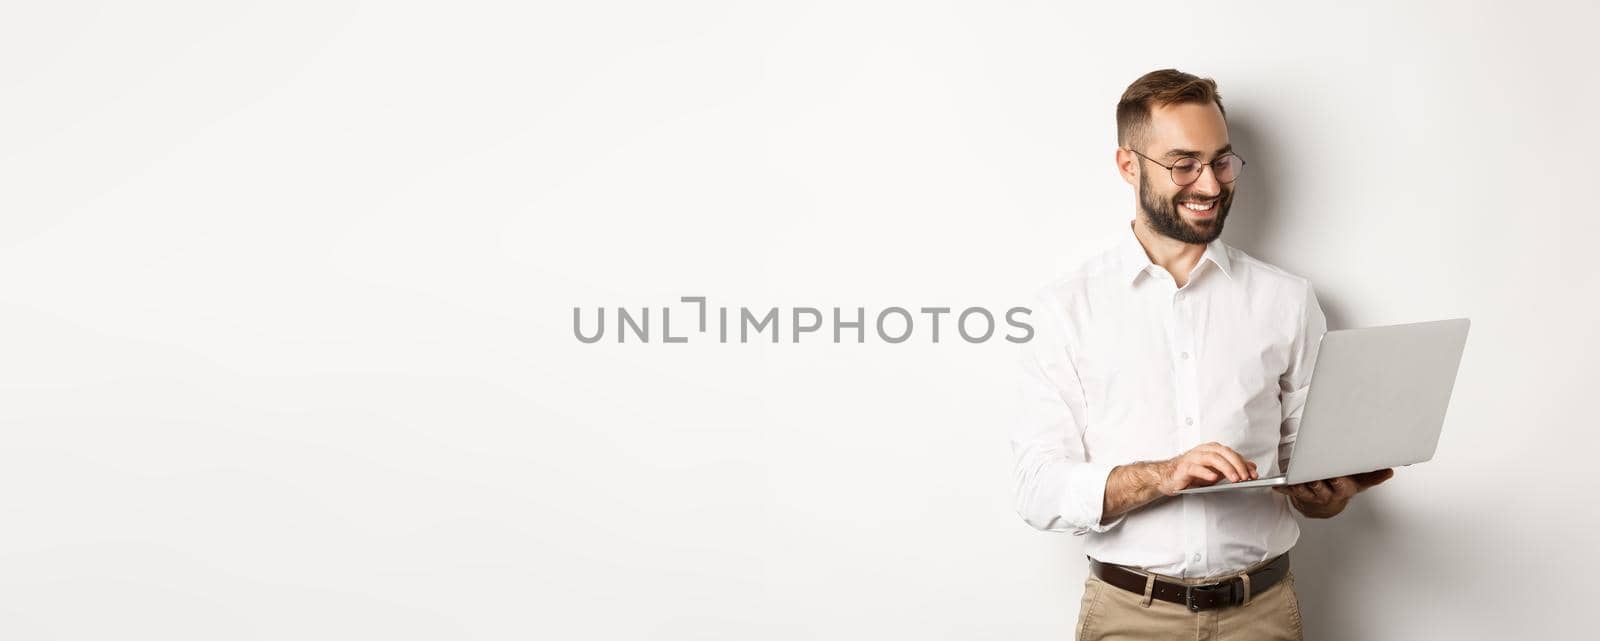 Business. Handsome businessman working on laptop, answering messages and smiling, standing over white background.